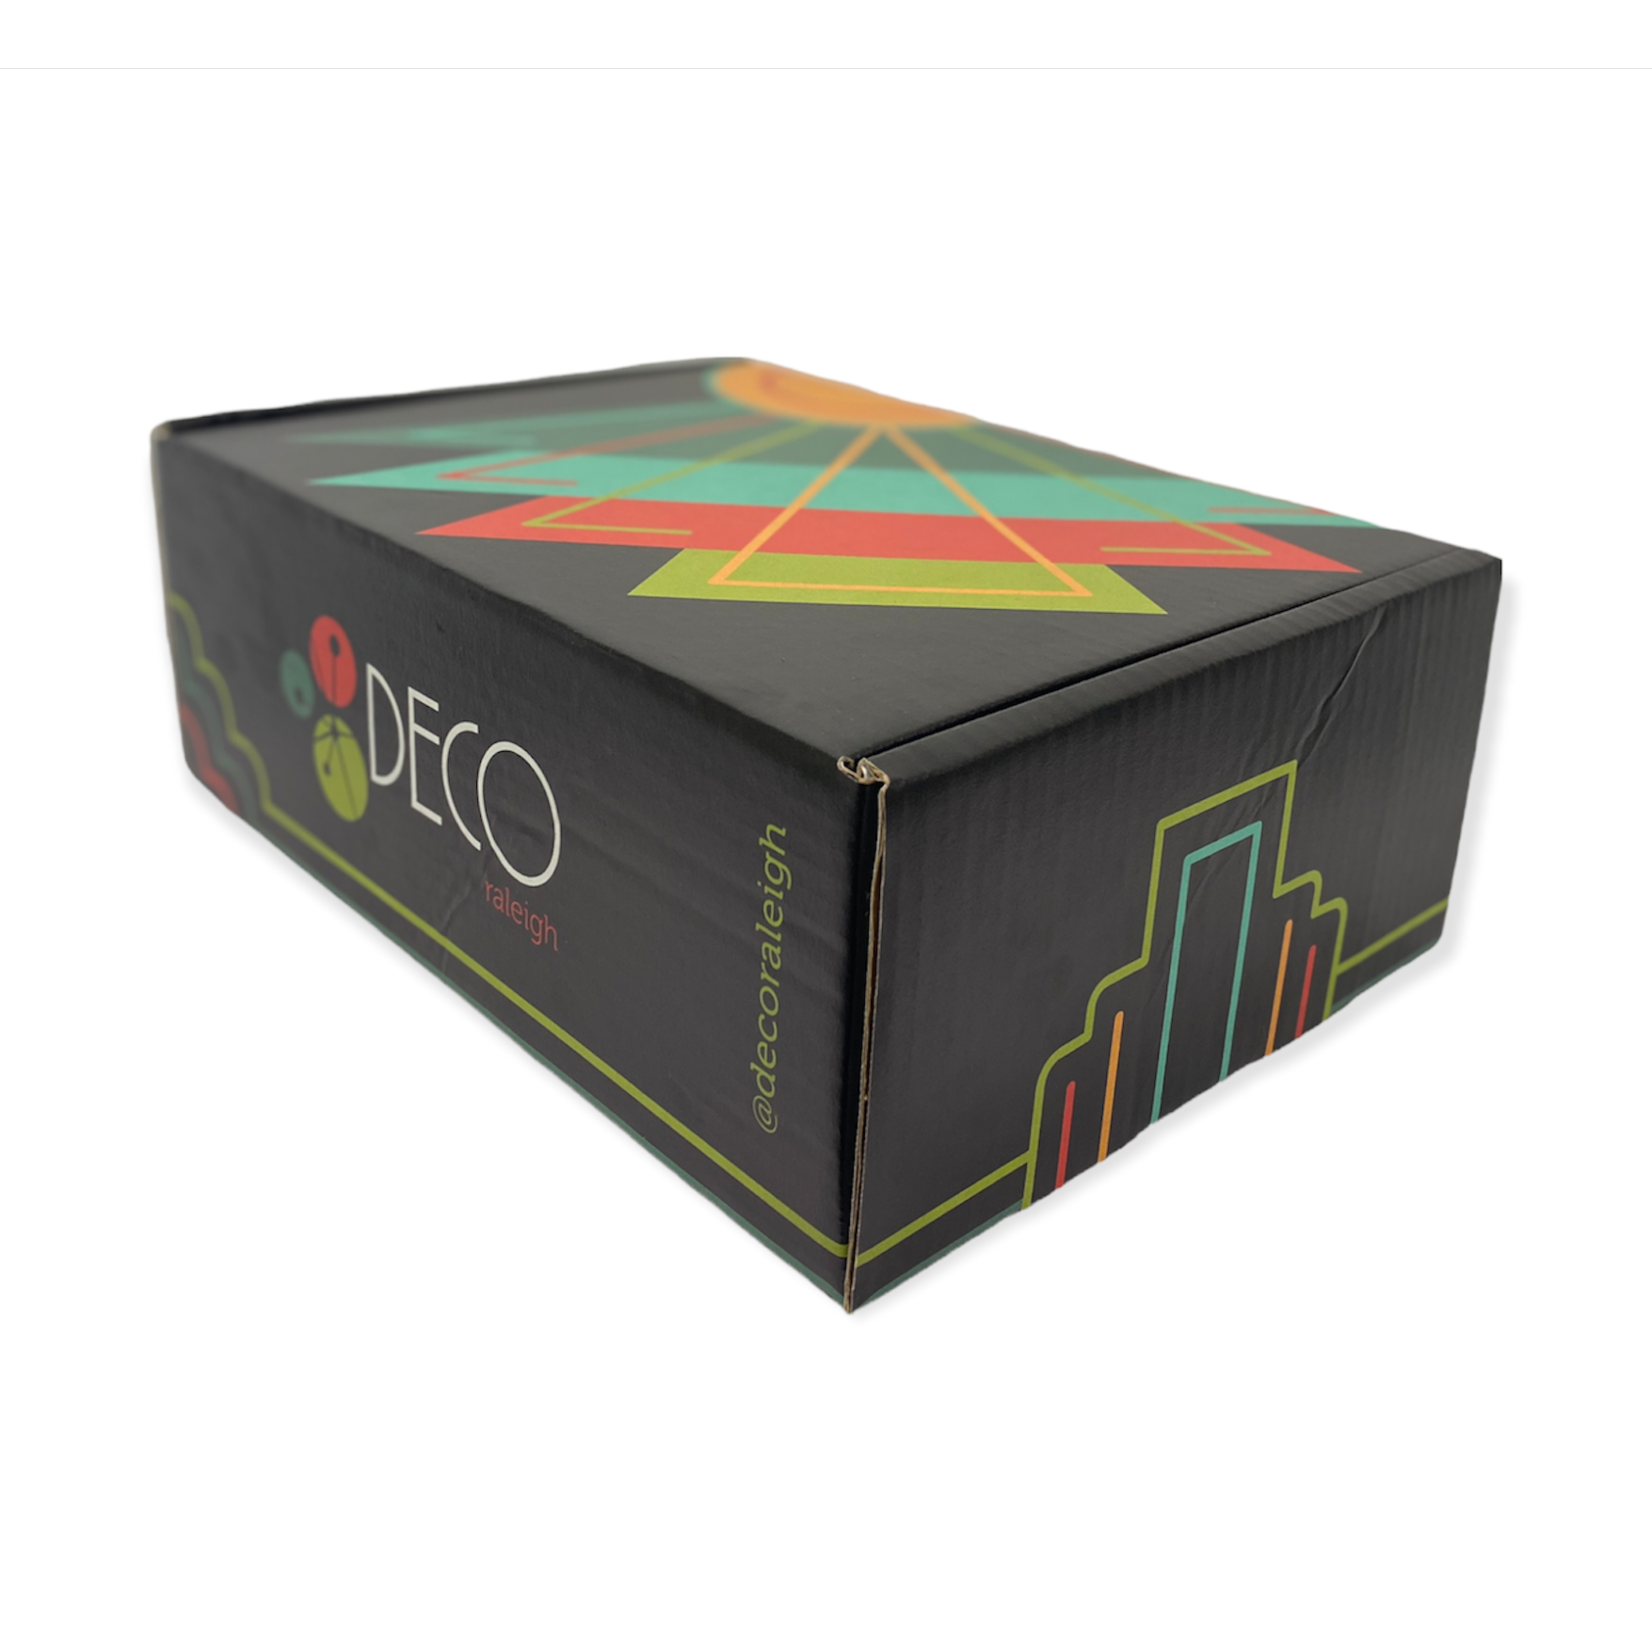 Deco Gift Box Large - DECO Raleigh